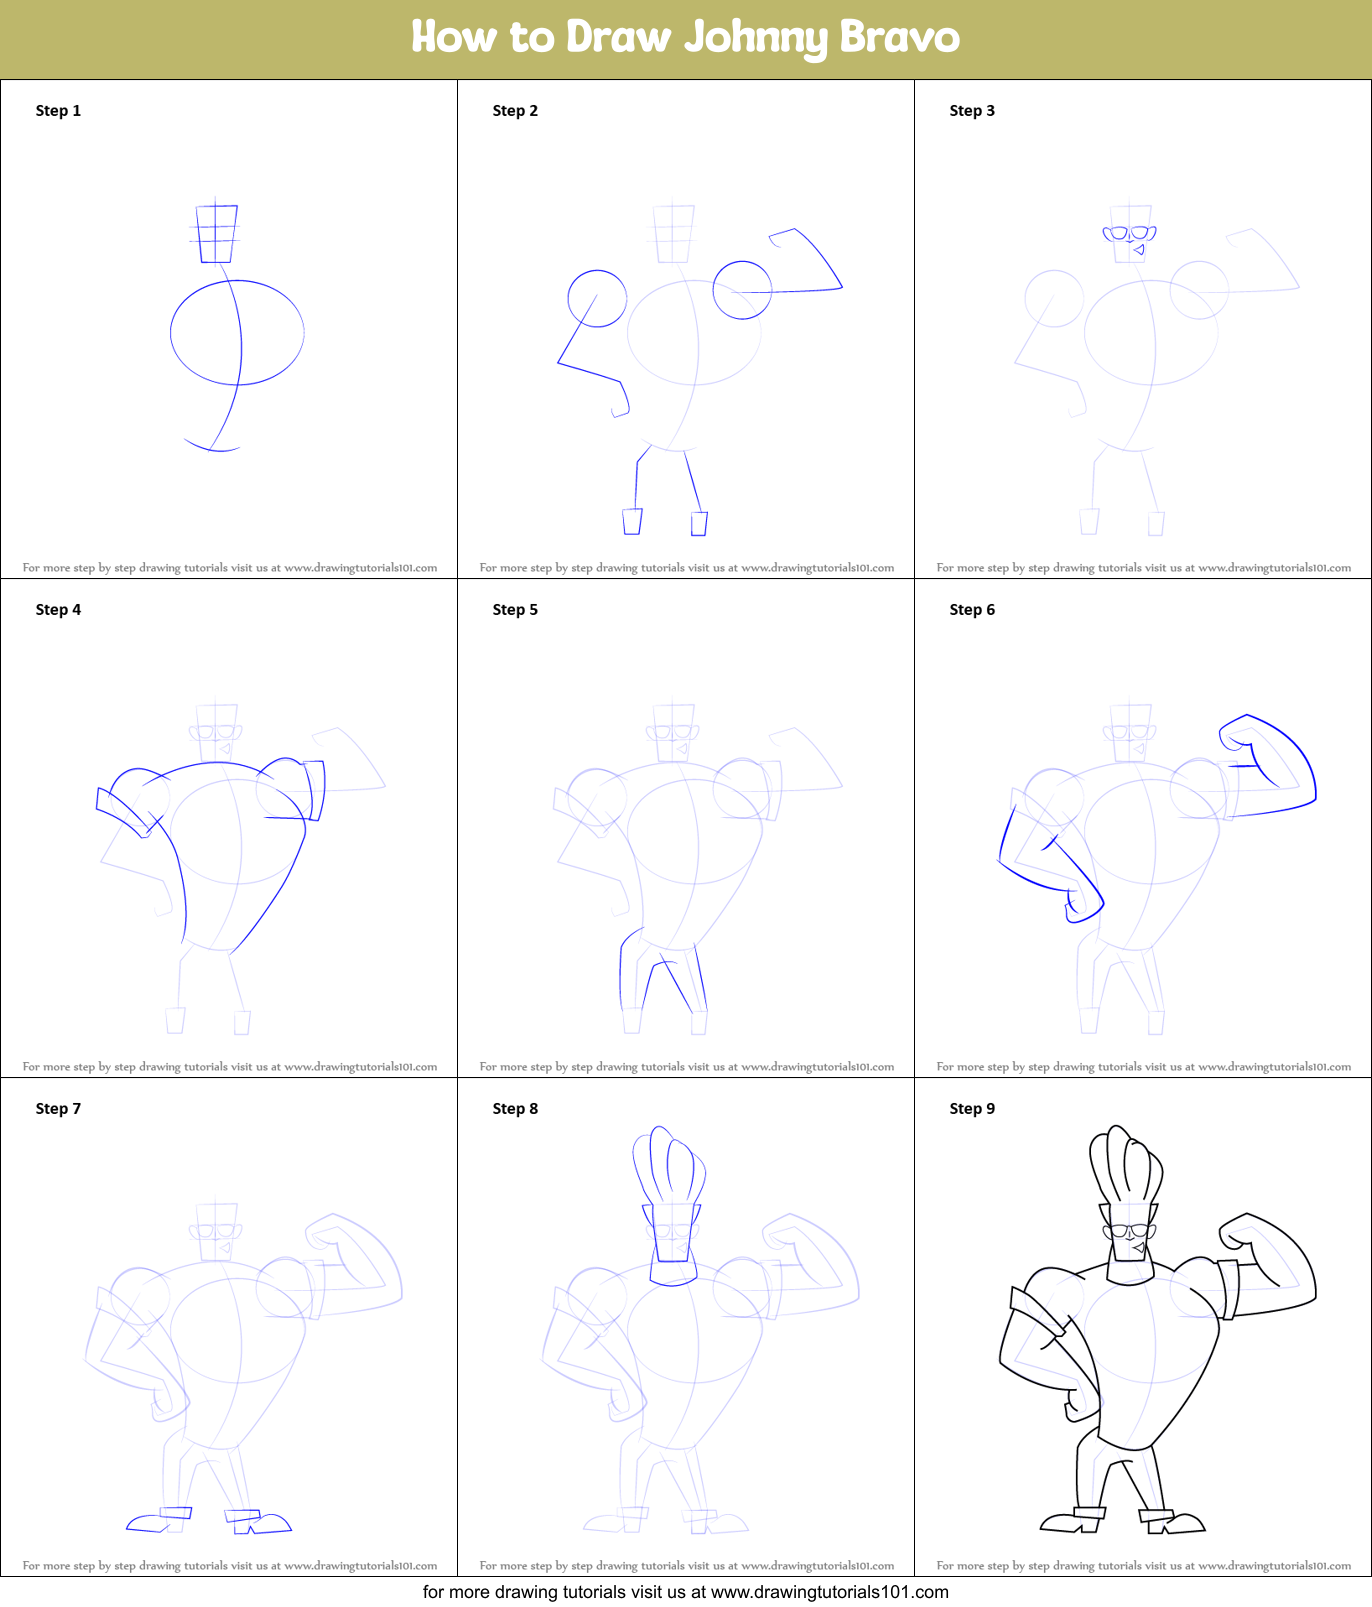 How to Draw Johnny Bravo printable step by step drawing sheet